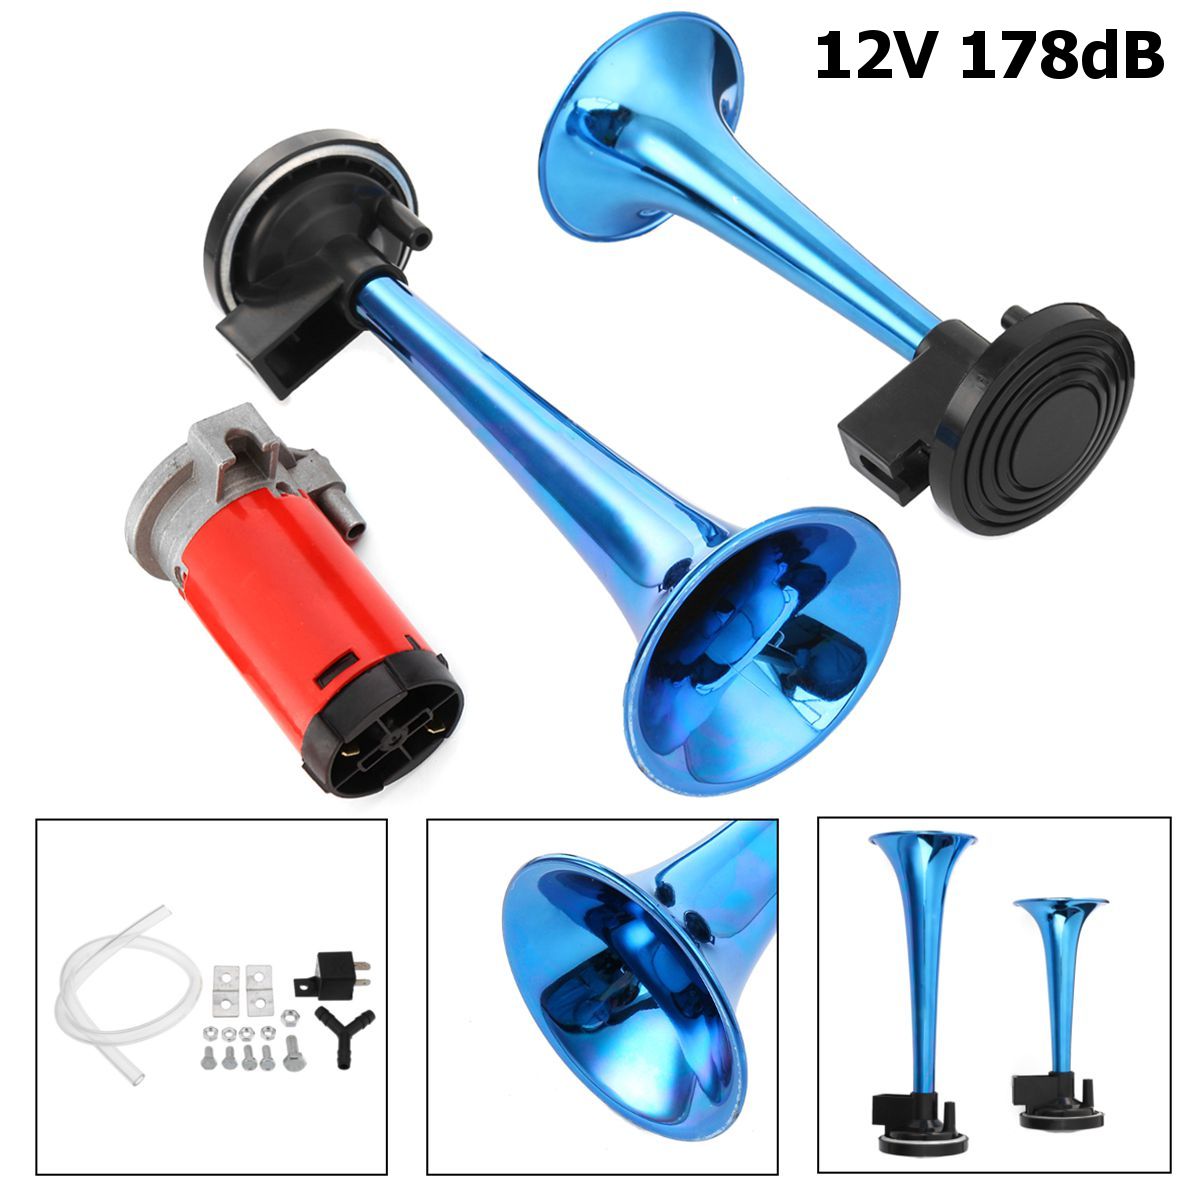 Tomato 12V 178DB Air Horn Dual Trumpet Ultra Loud Universal For Train Trailer Truck Motorcycle